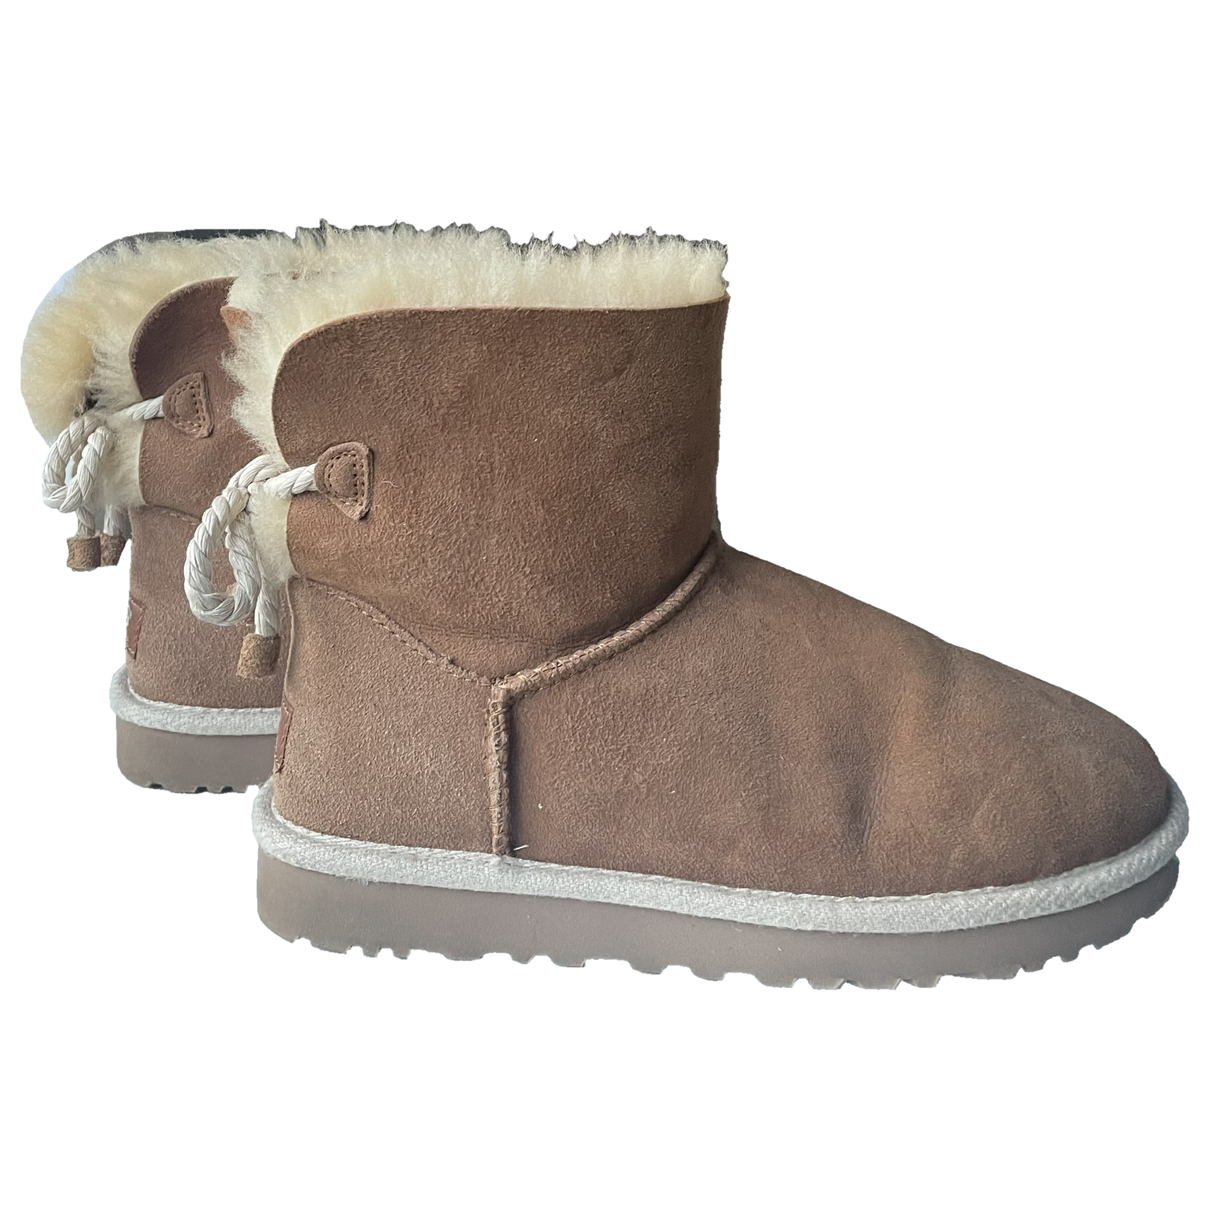 shoes Ugg boots for Female Suede 38 EU. Used condition